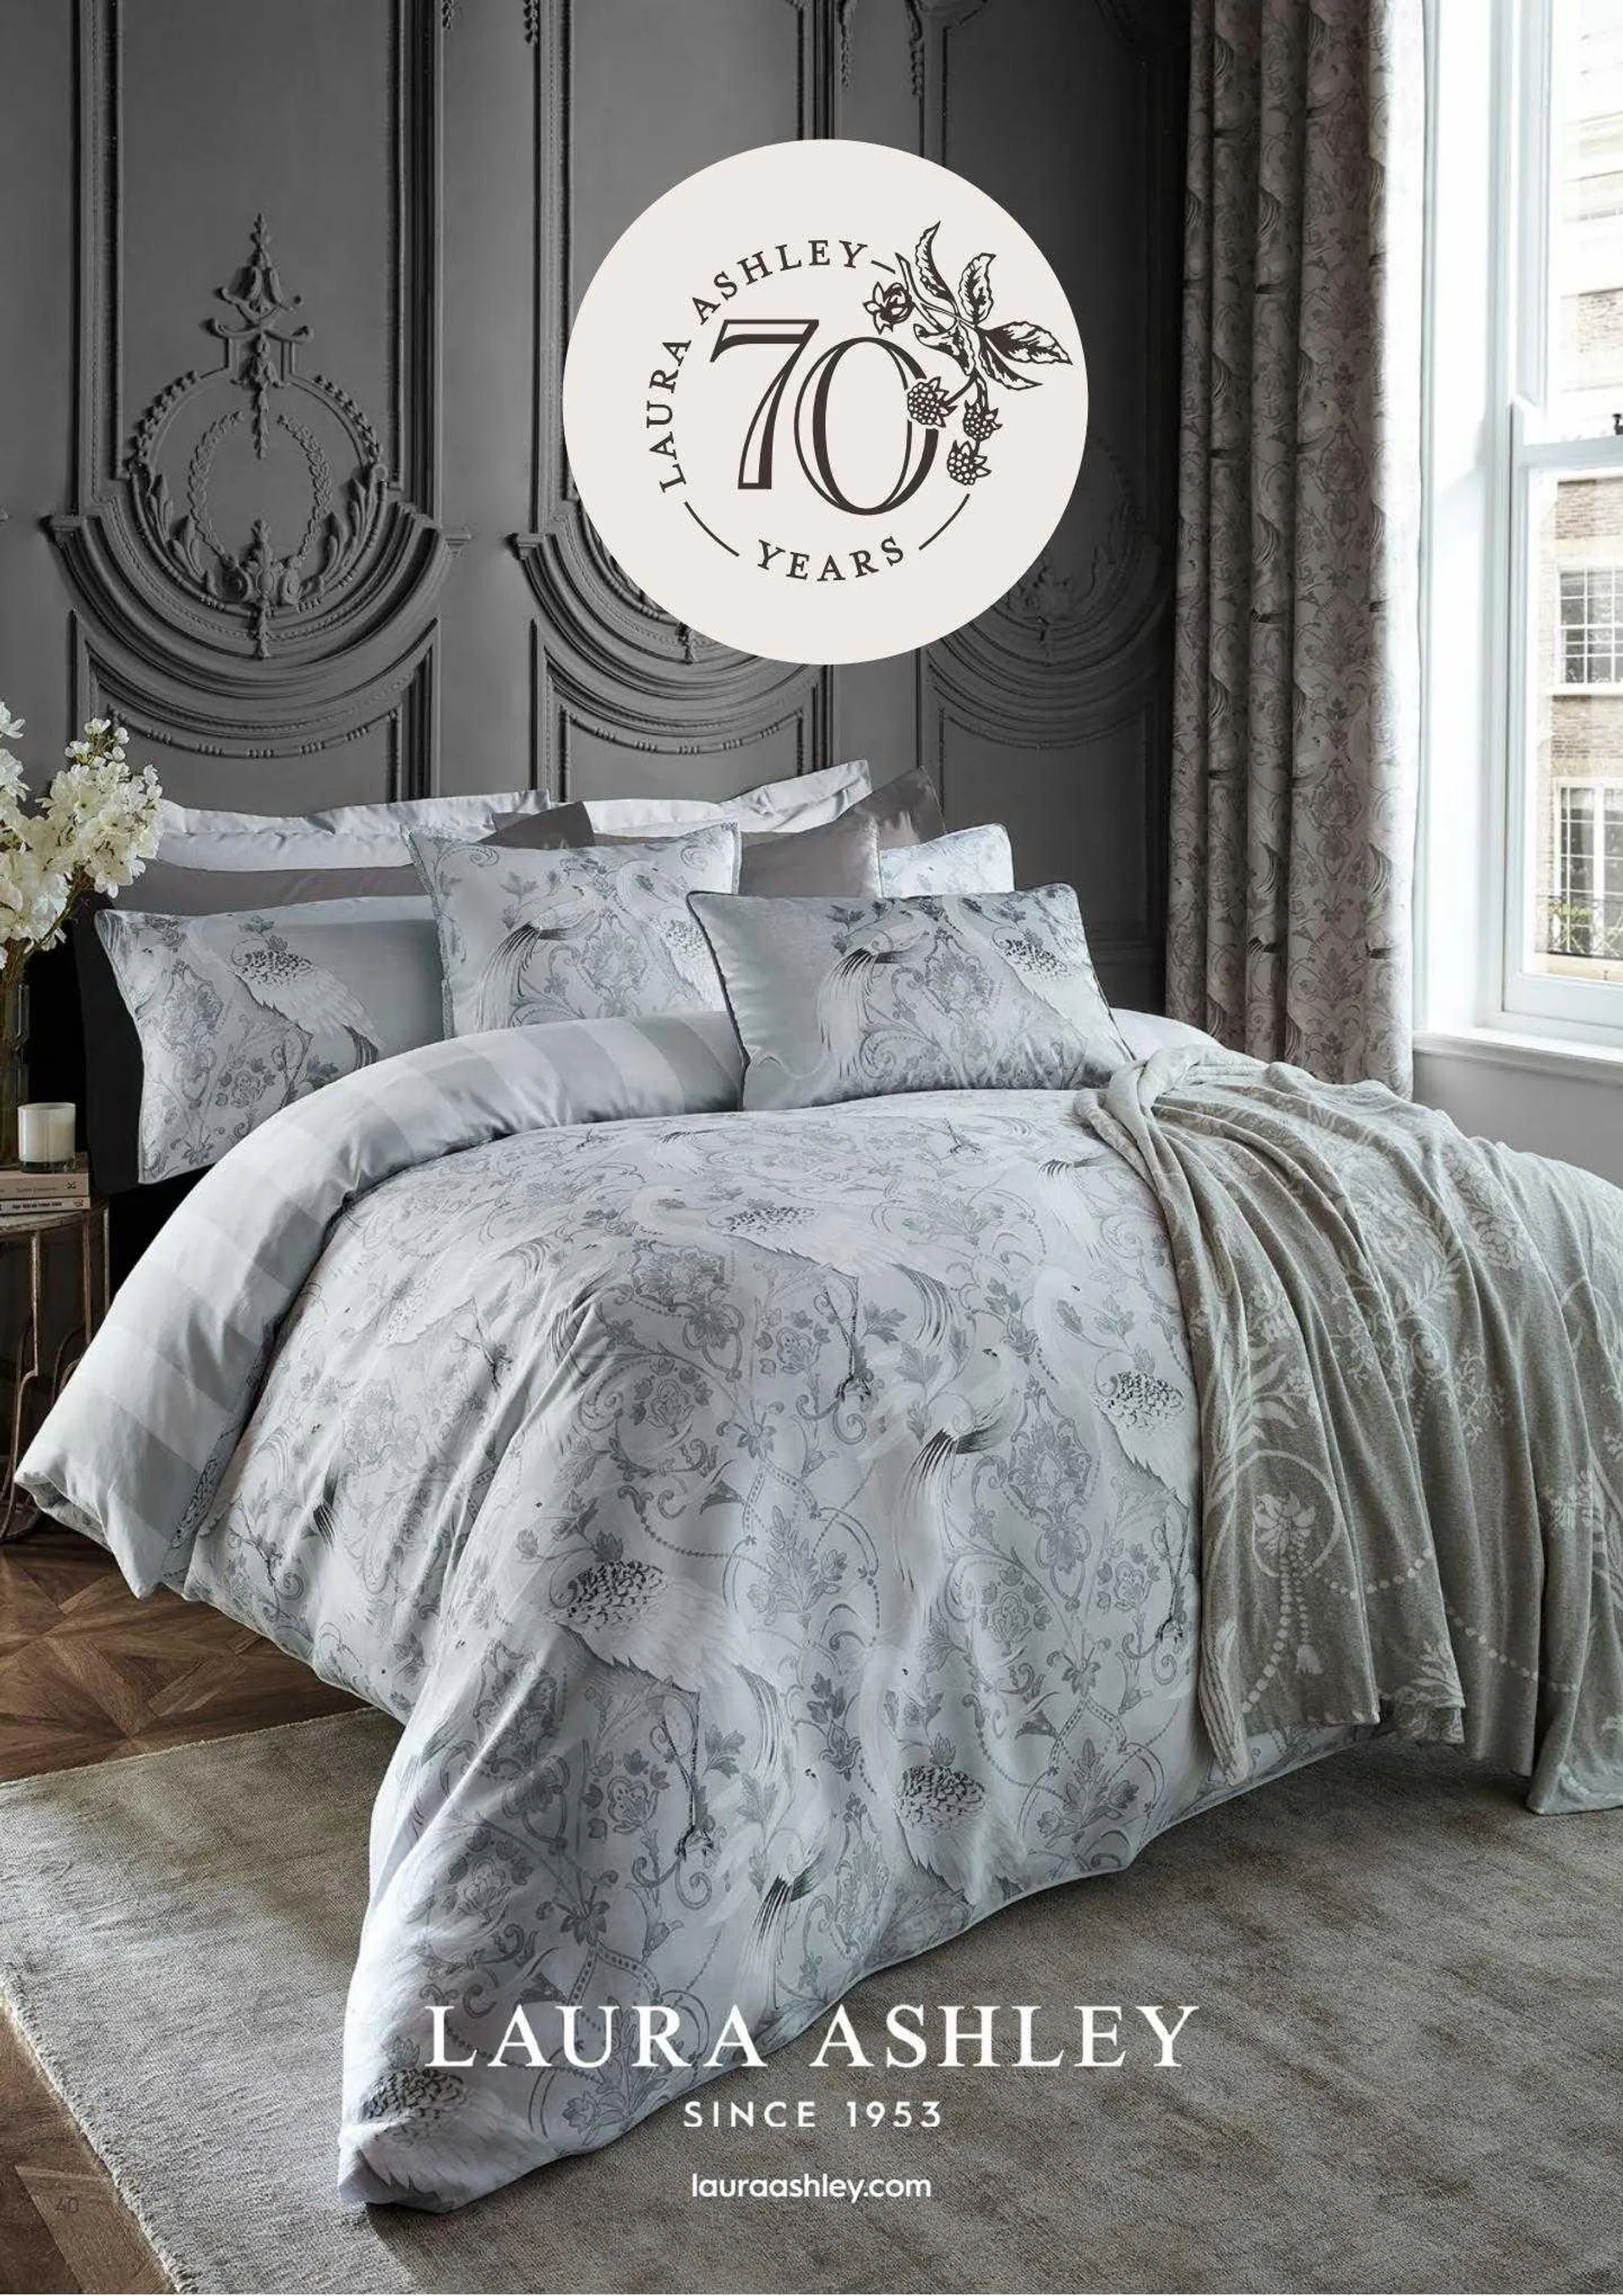 Laura Ashley Weekly Offers - 40